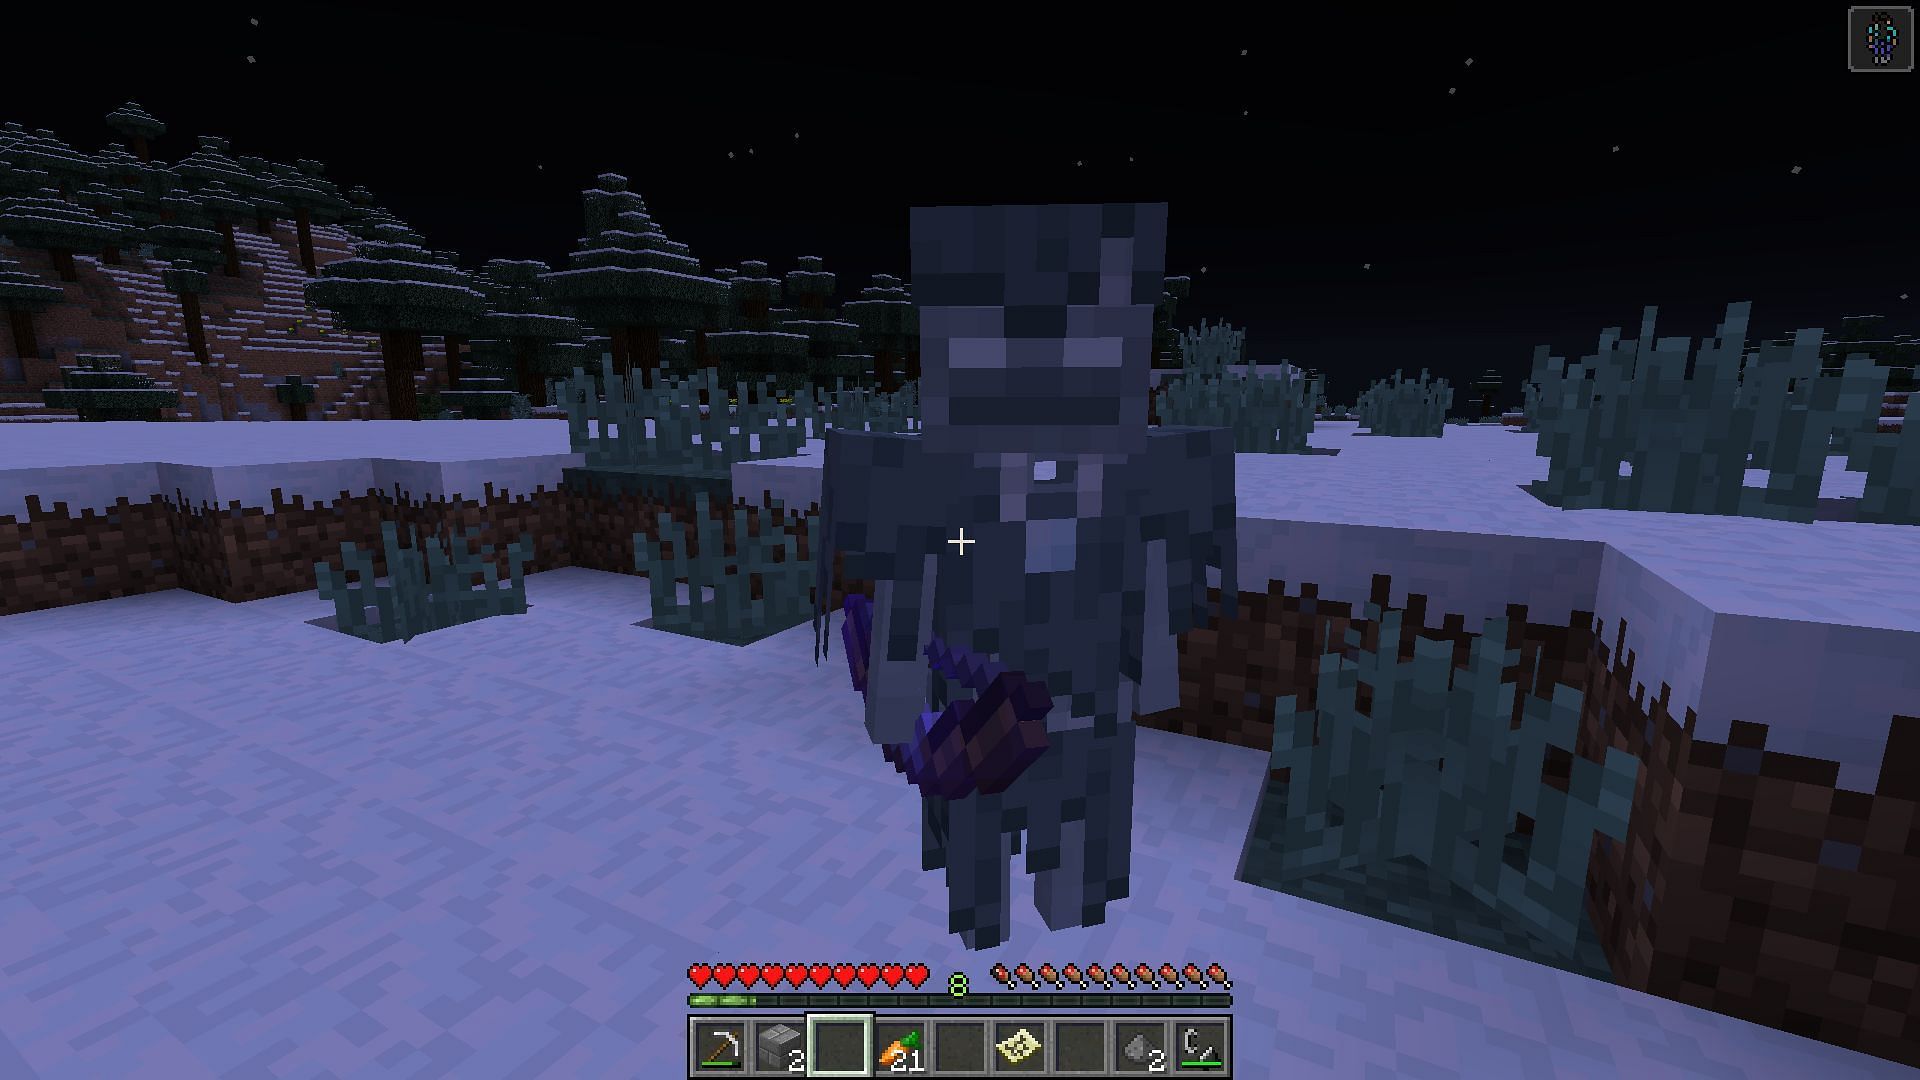 A stray that wandered into a snowy plain (Image via Minecraft)